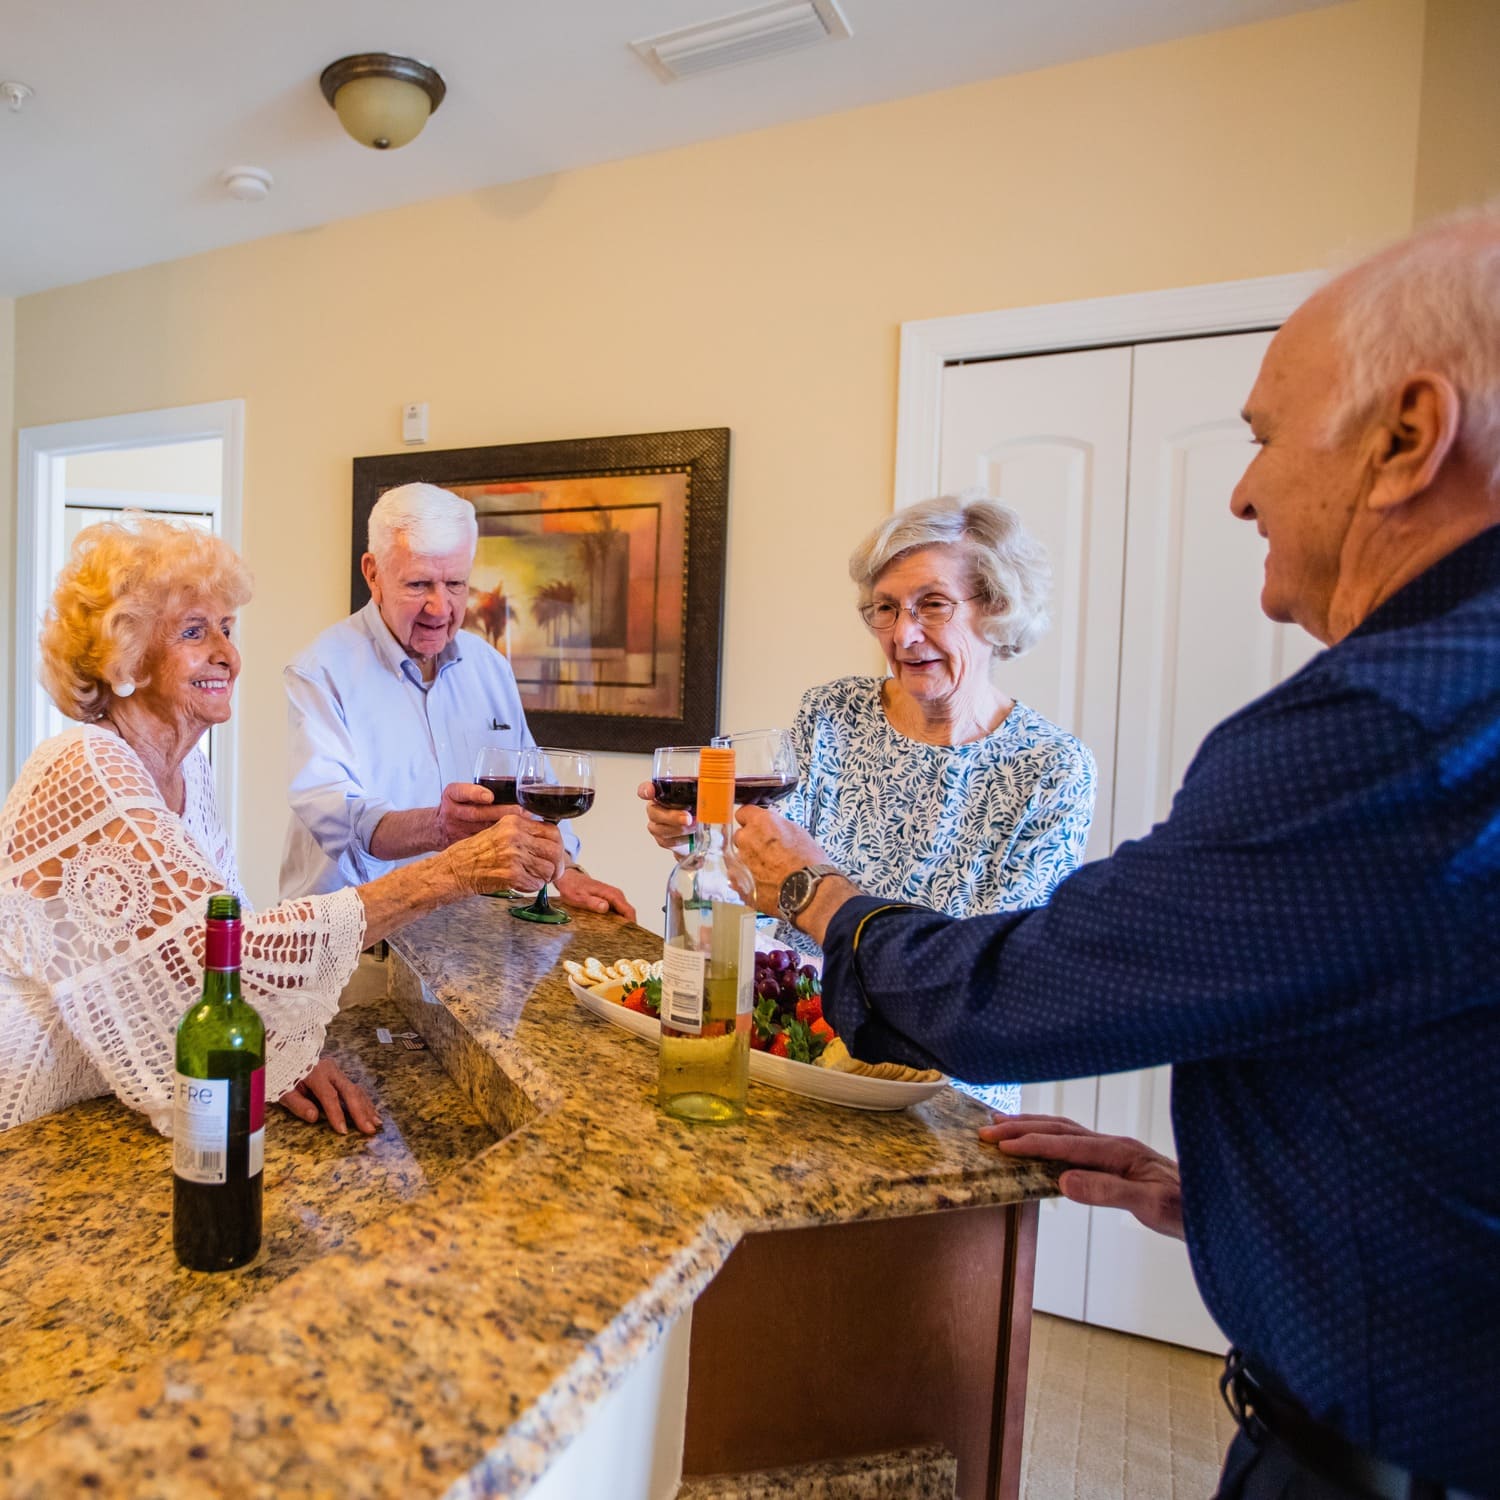 Four senior friends toasting with wine in a kitchen